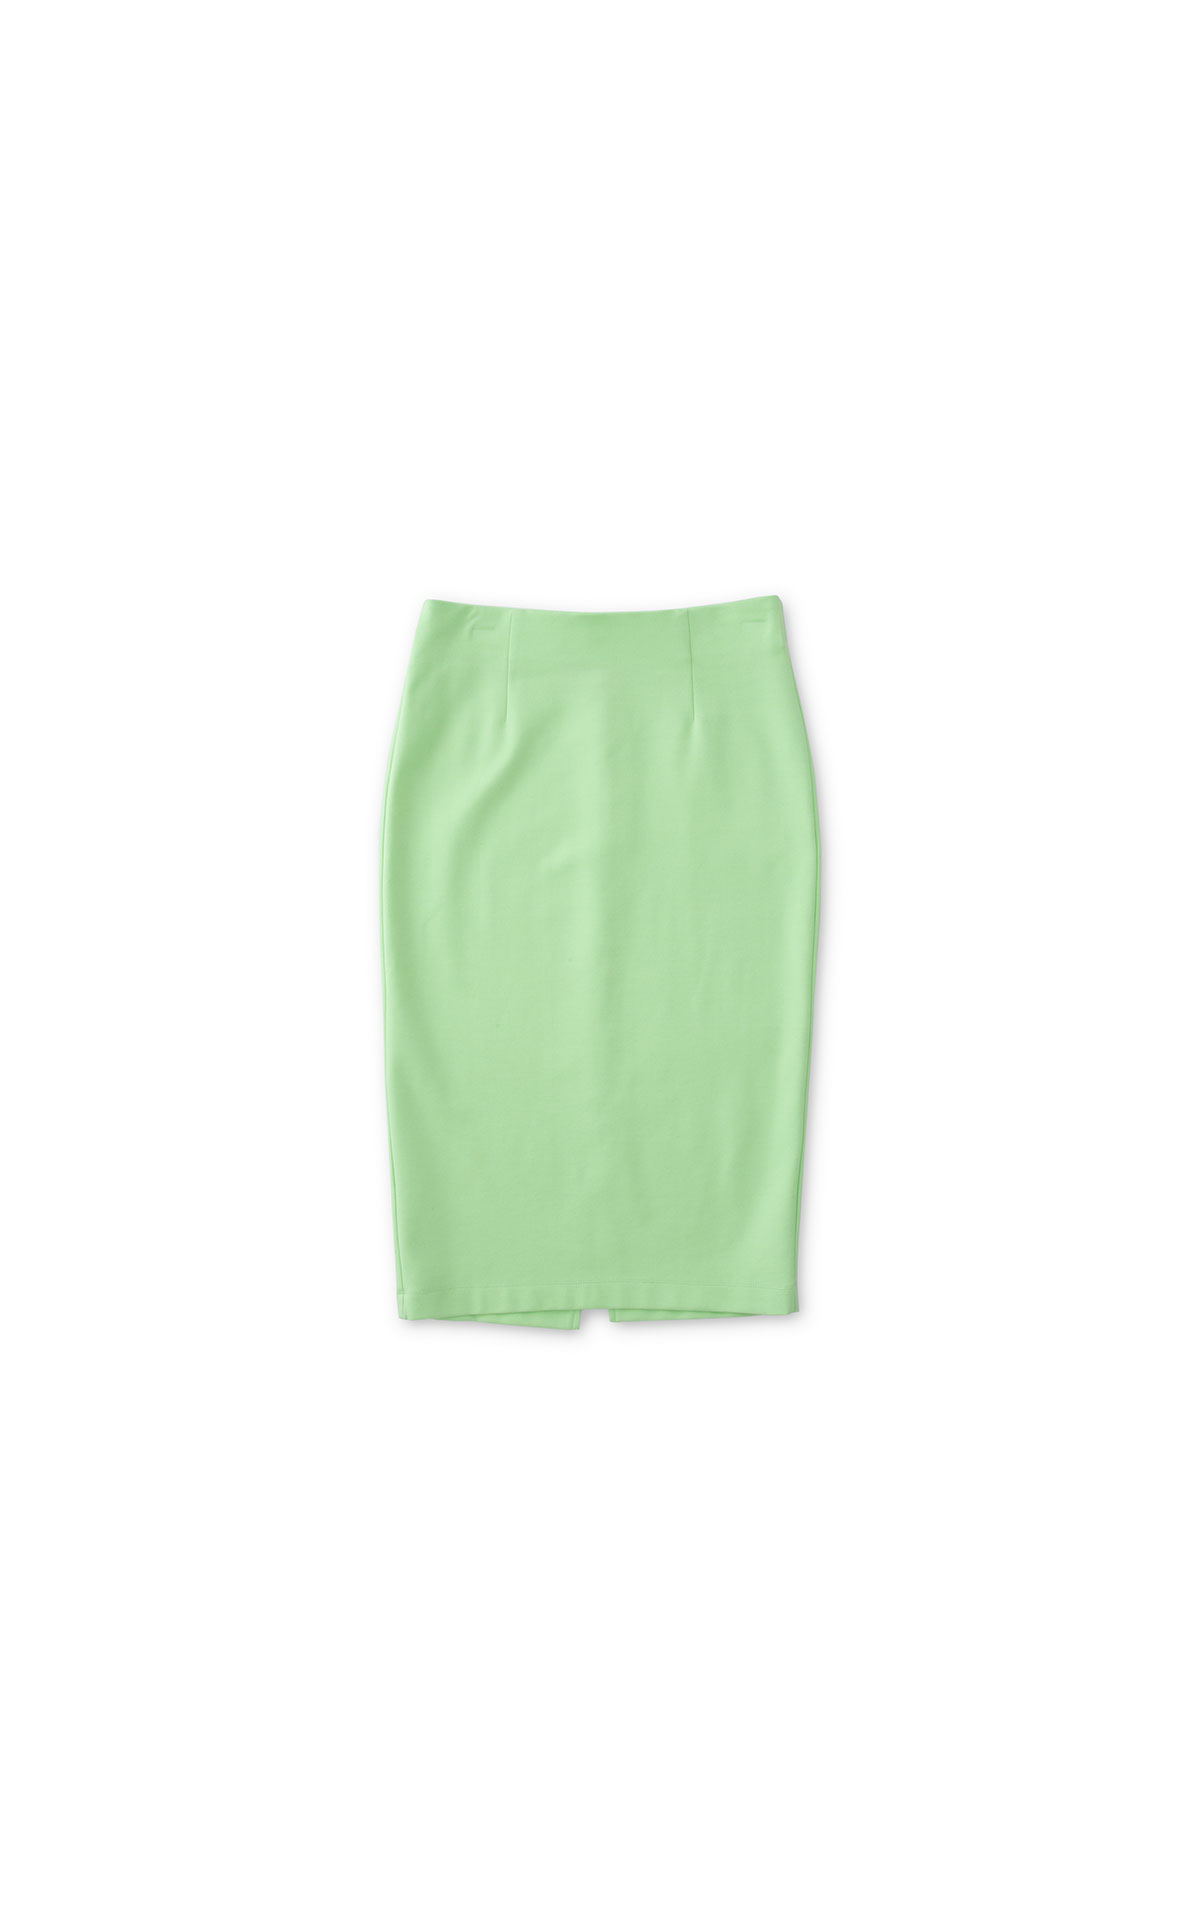 DKNY Green skirt from Bicester Village